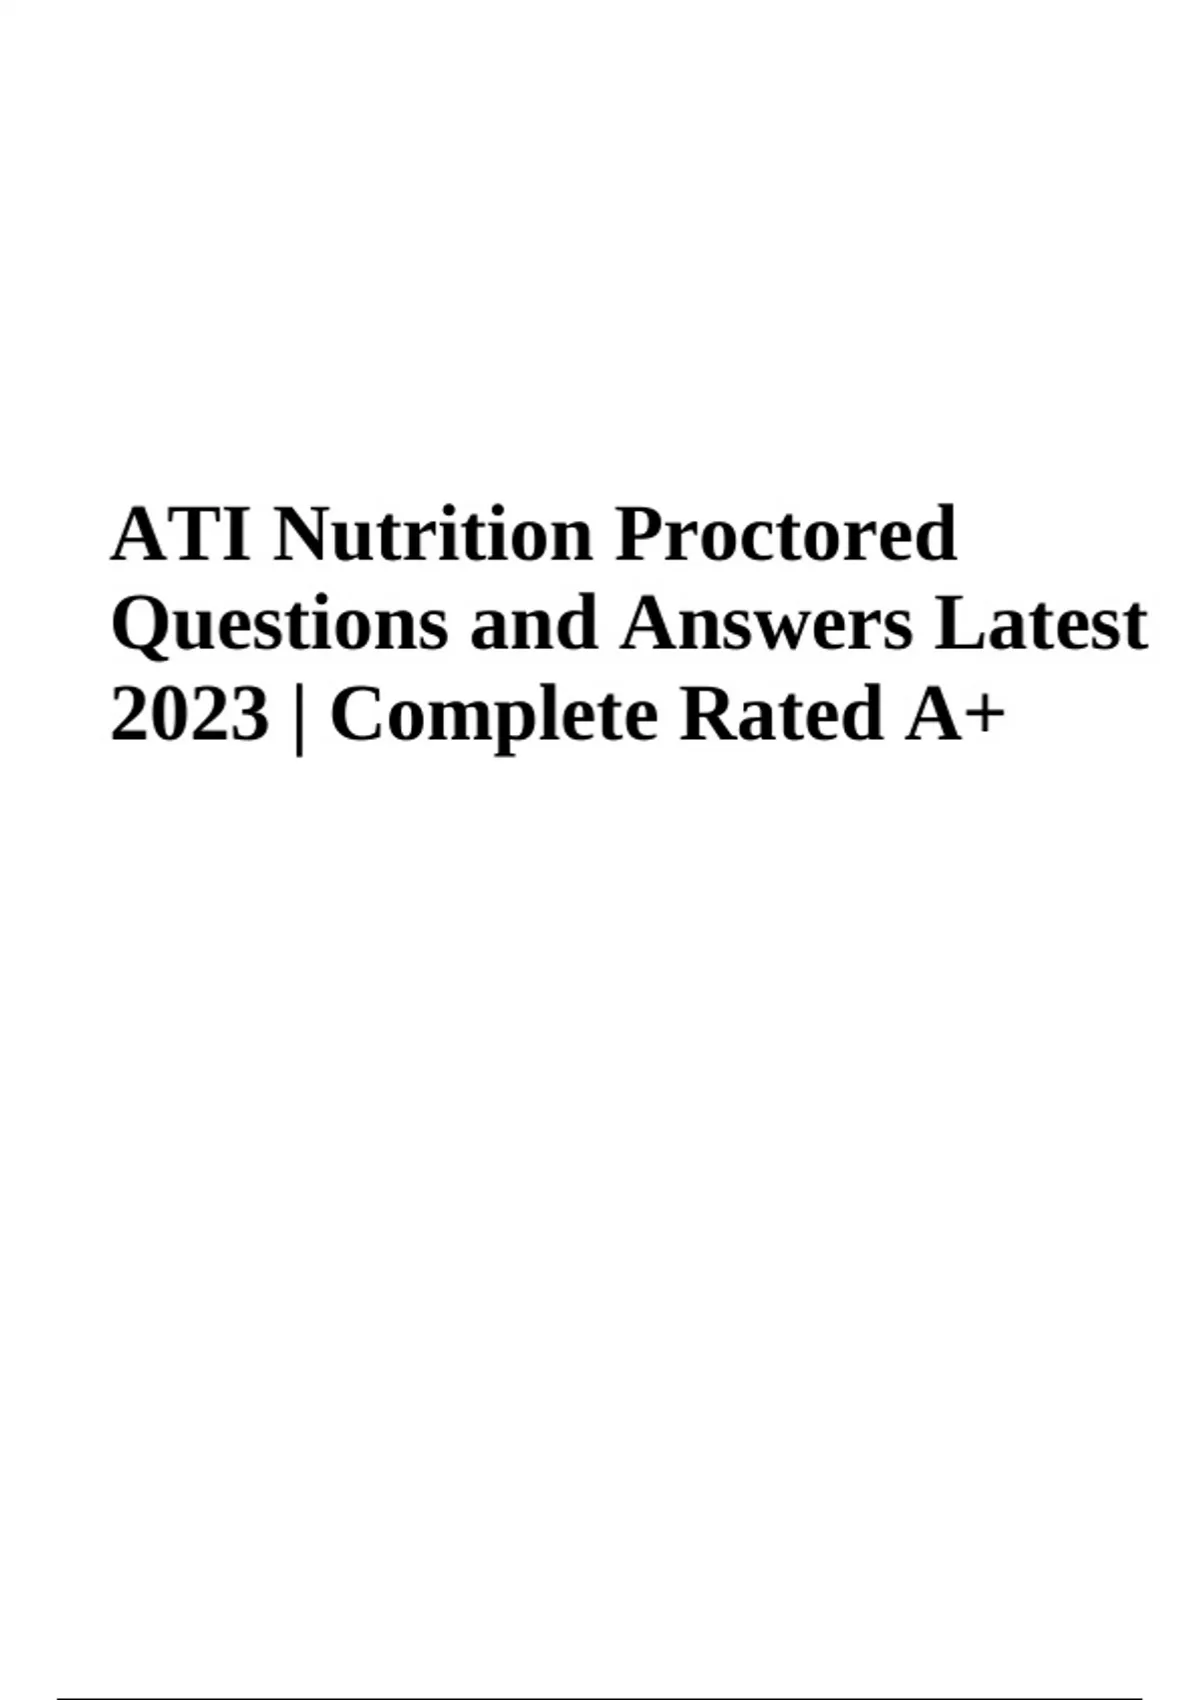 ATI Nutrition Proctored Exam Questions With Answers Latest Update